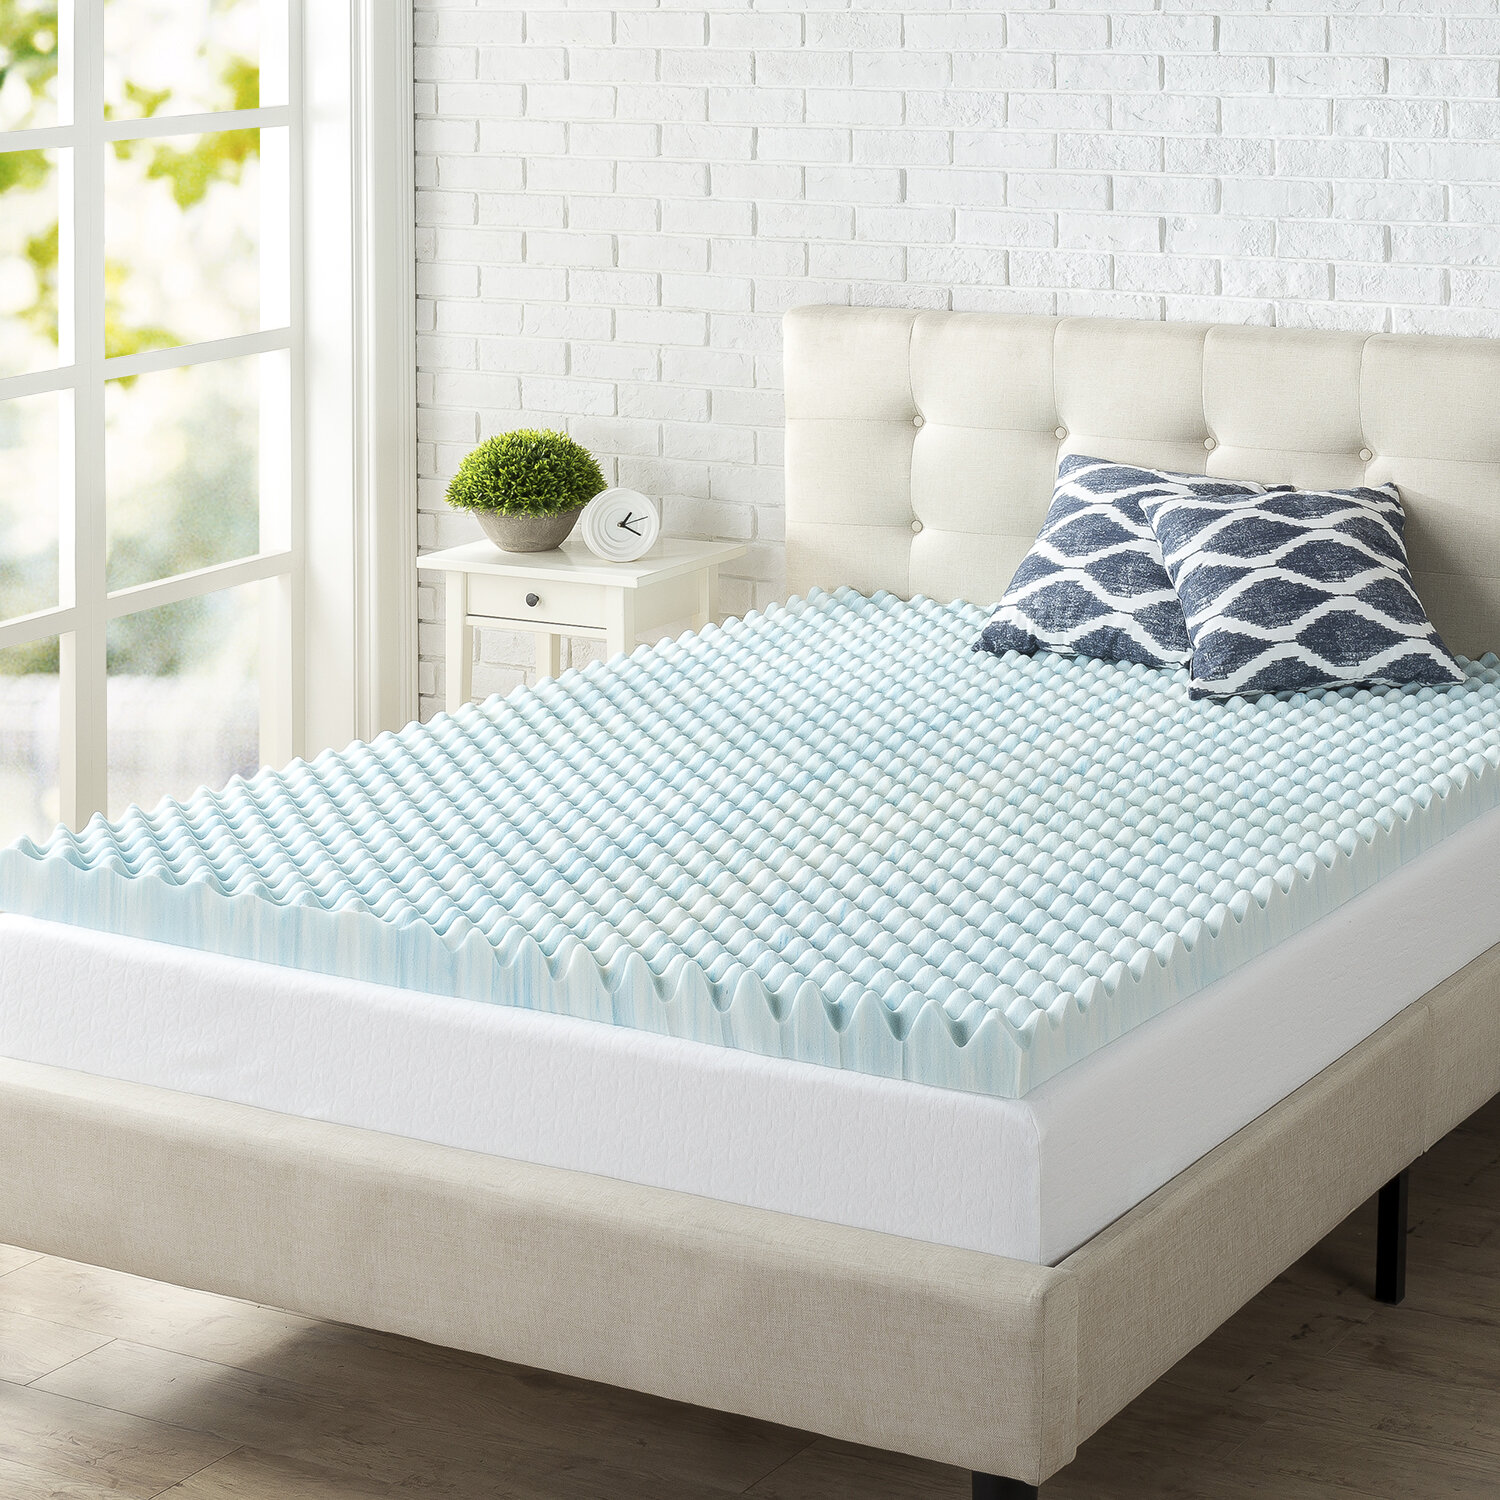 Details about   2''/3''/4'' Memory Foam Mattress Topper Ventilated Topper with Free Tencel Cover 